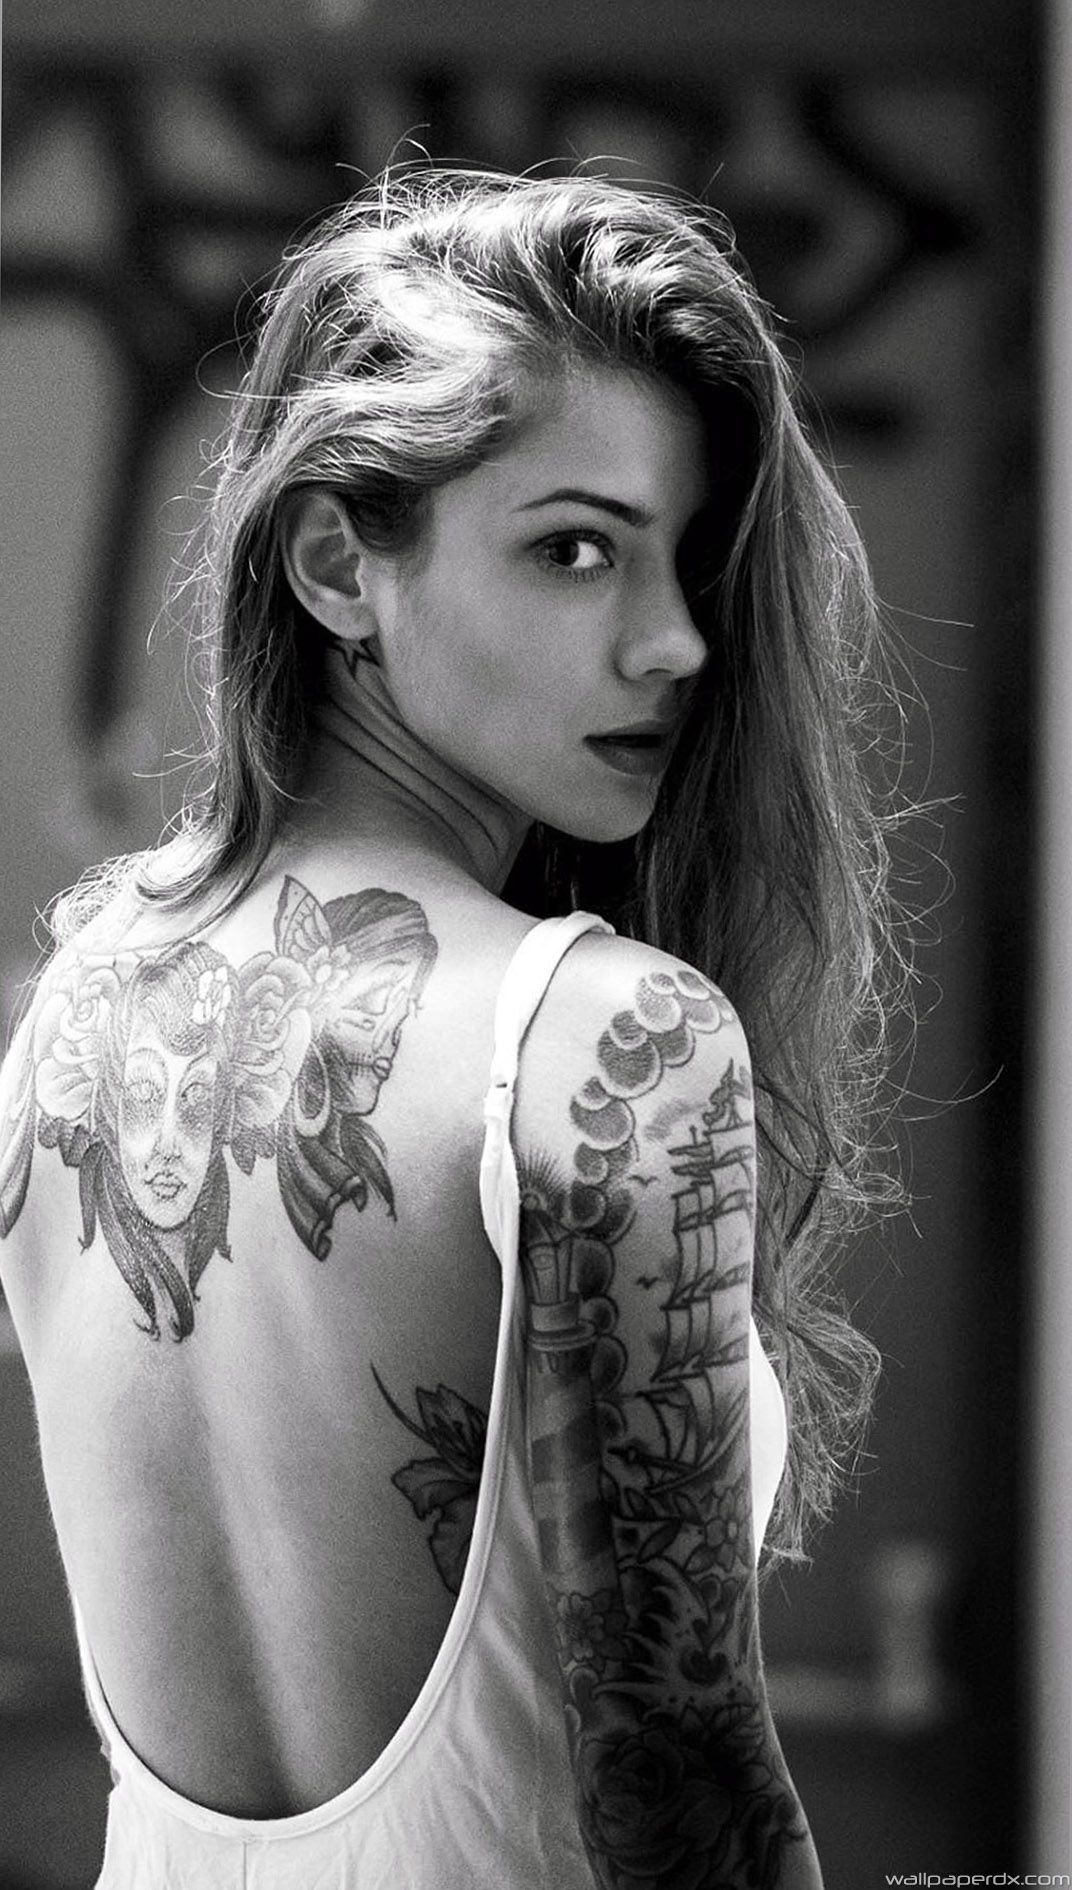 Tattoo Girl Images Wallpapers - Wallpaper Cave